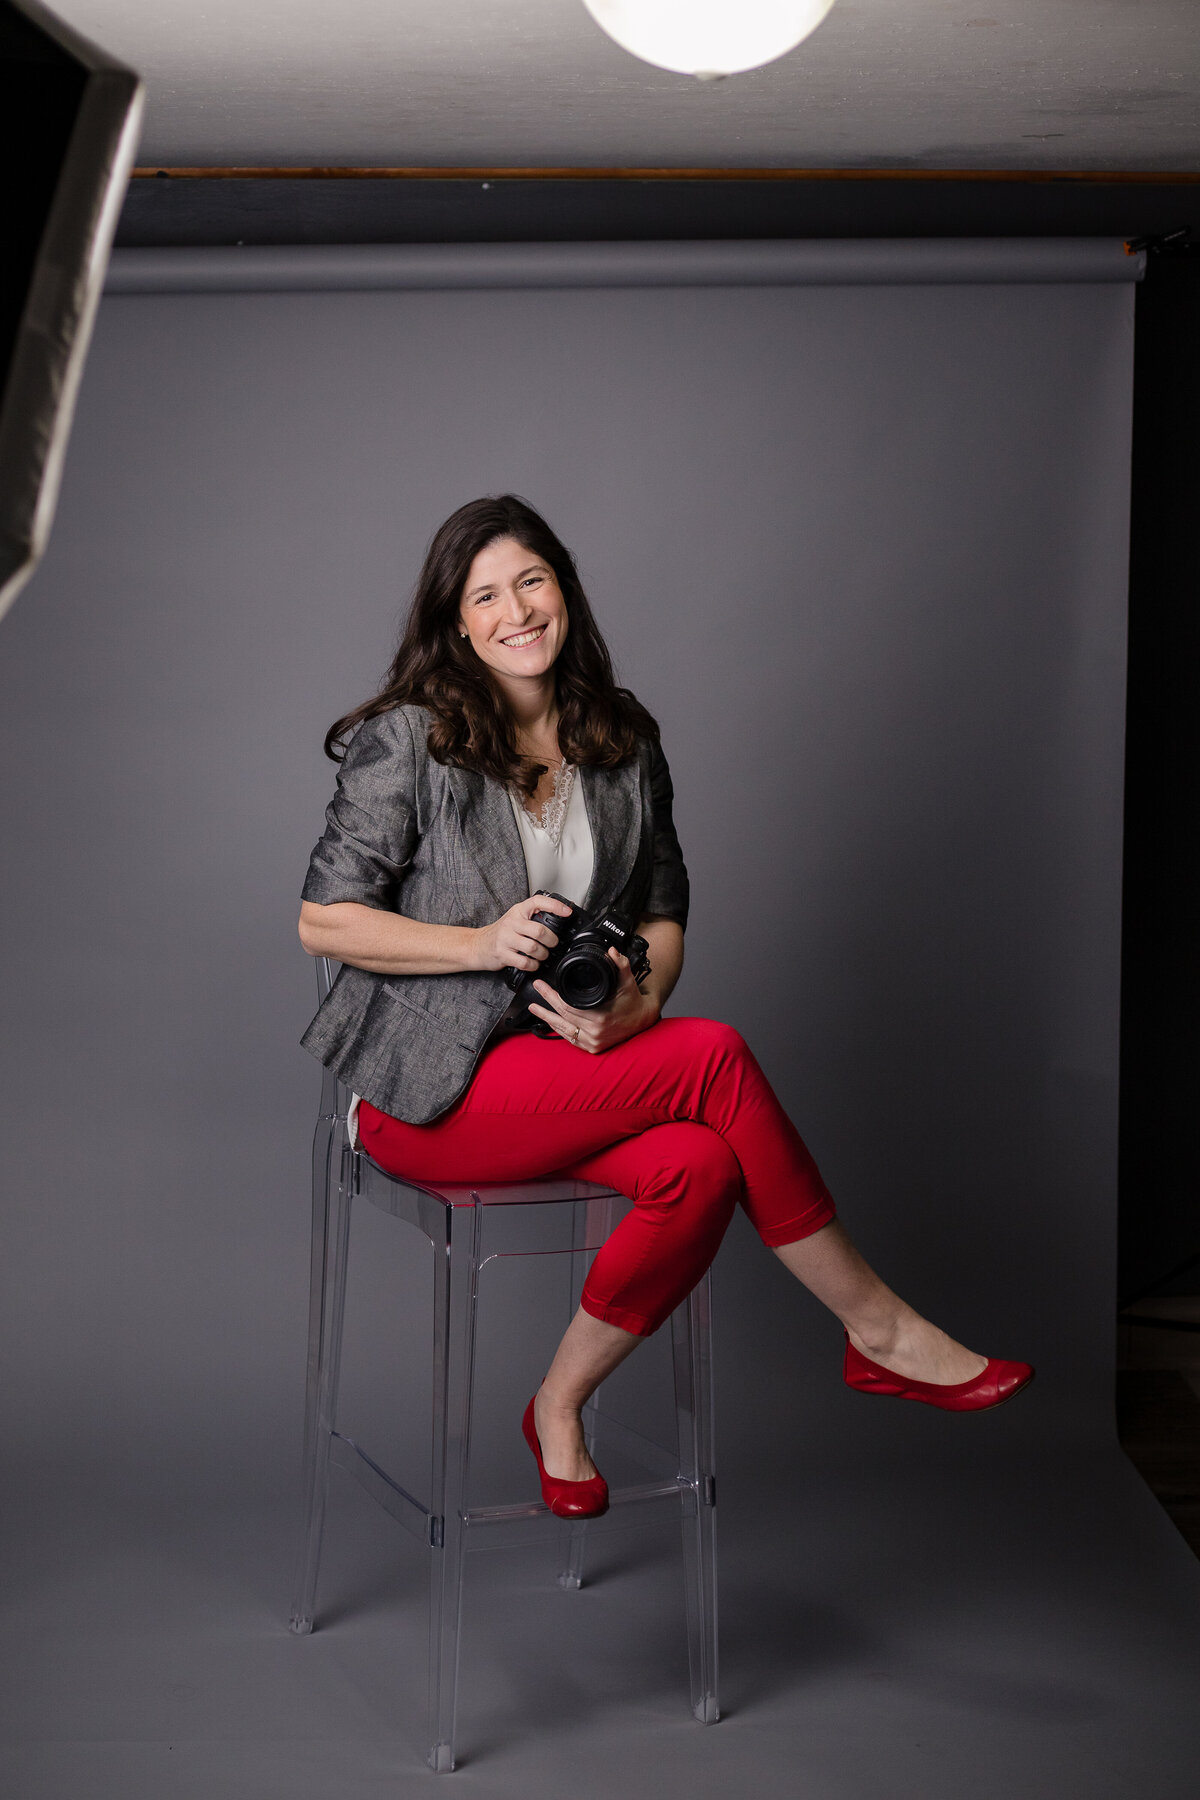 photographer Lori pickens in red pants and red shoes sitting on clear chair in photo studio with flash shown in corner